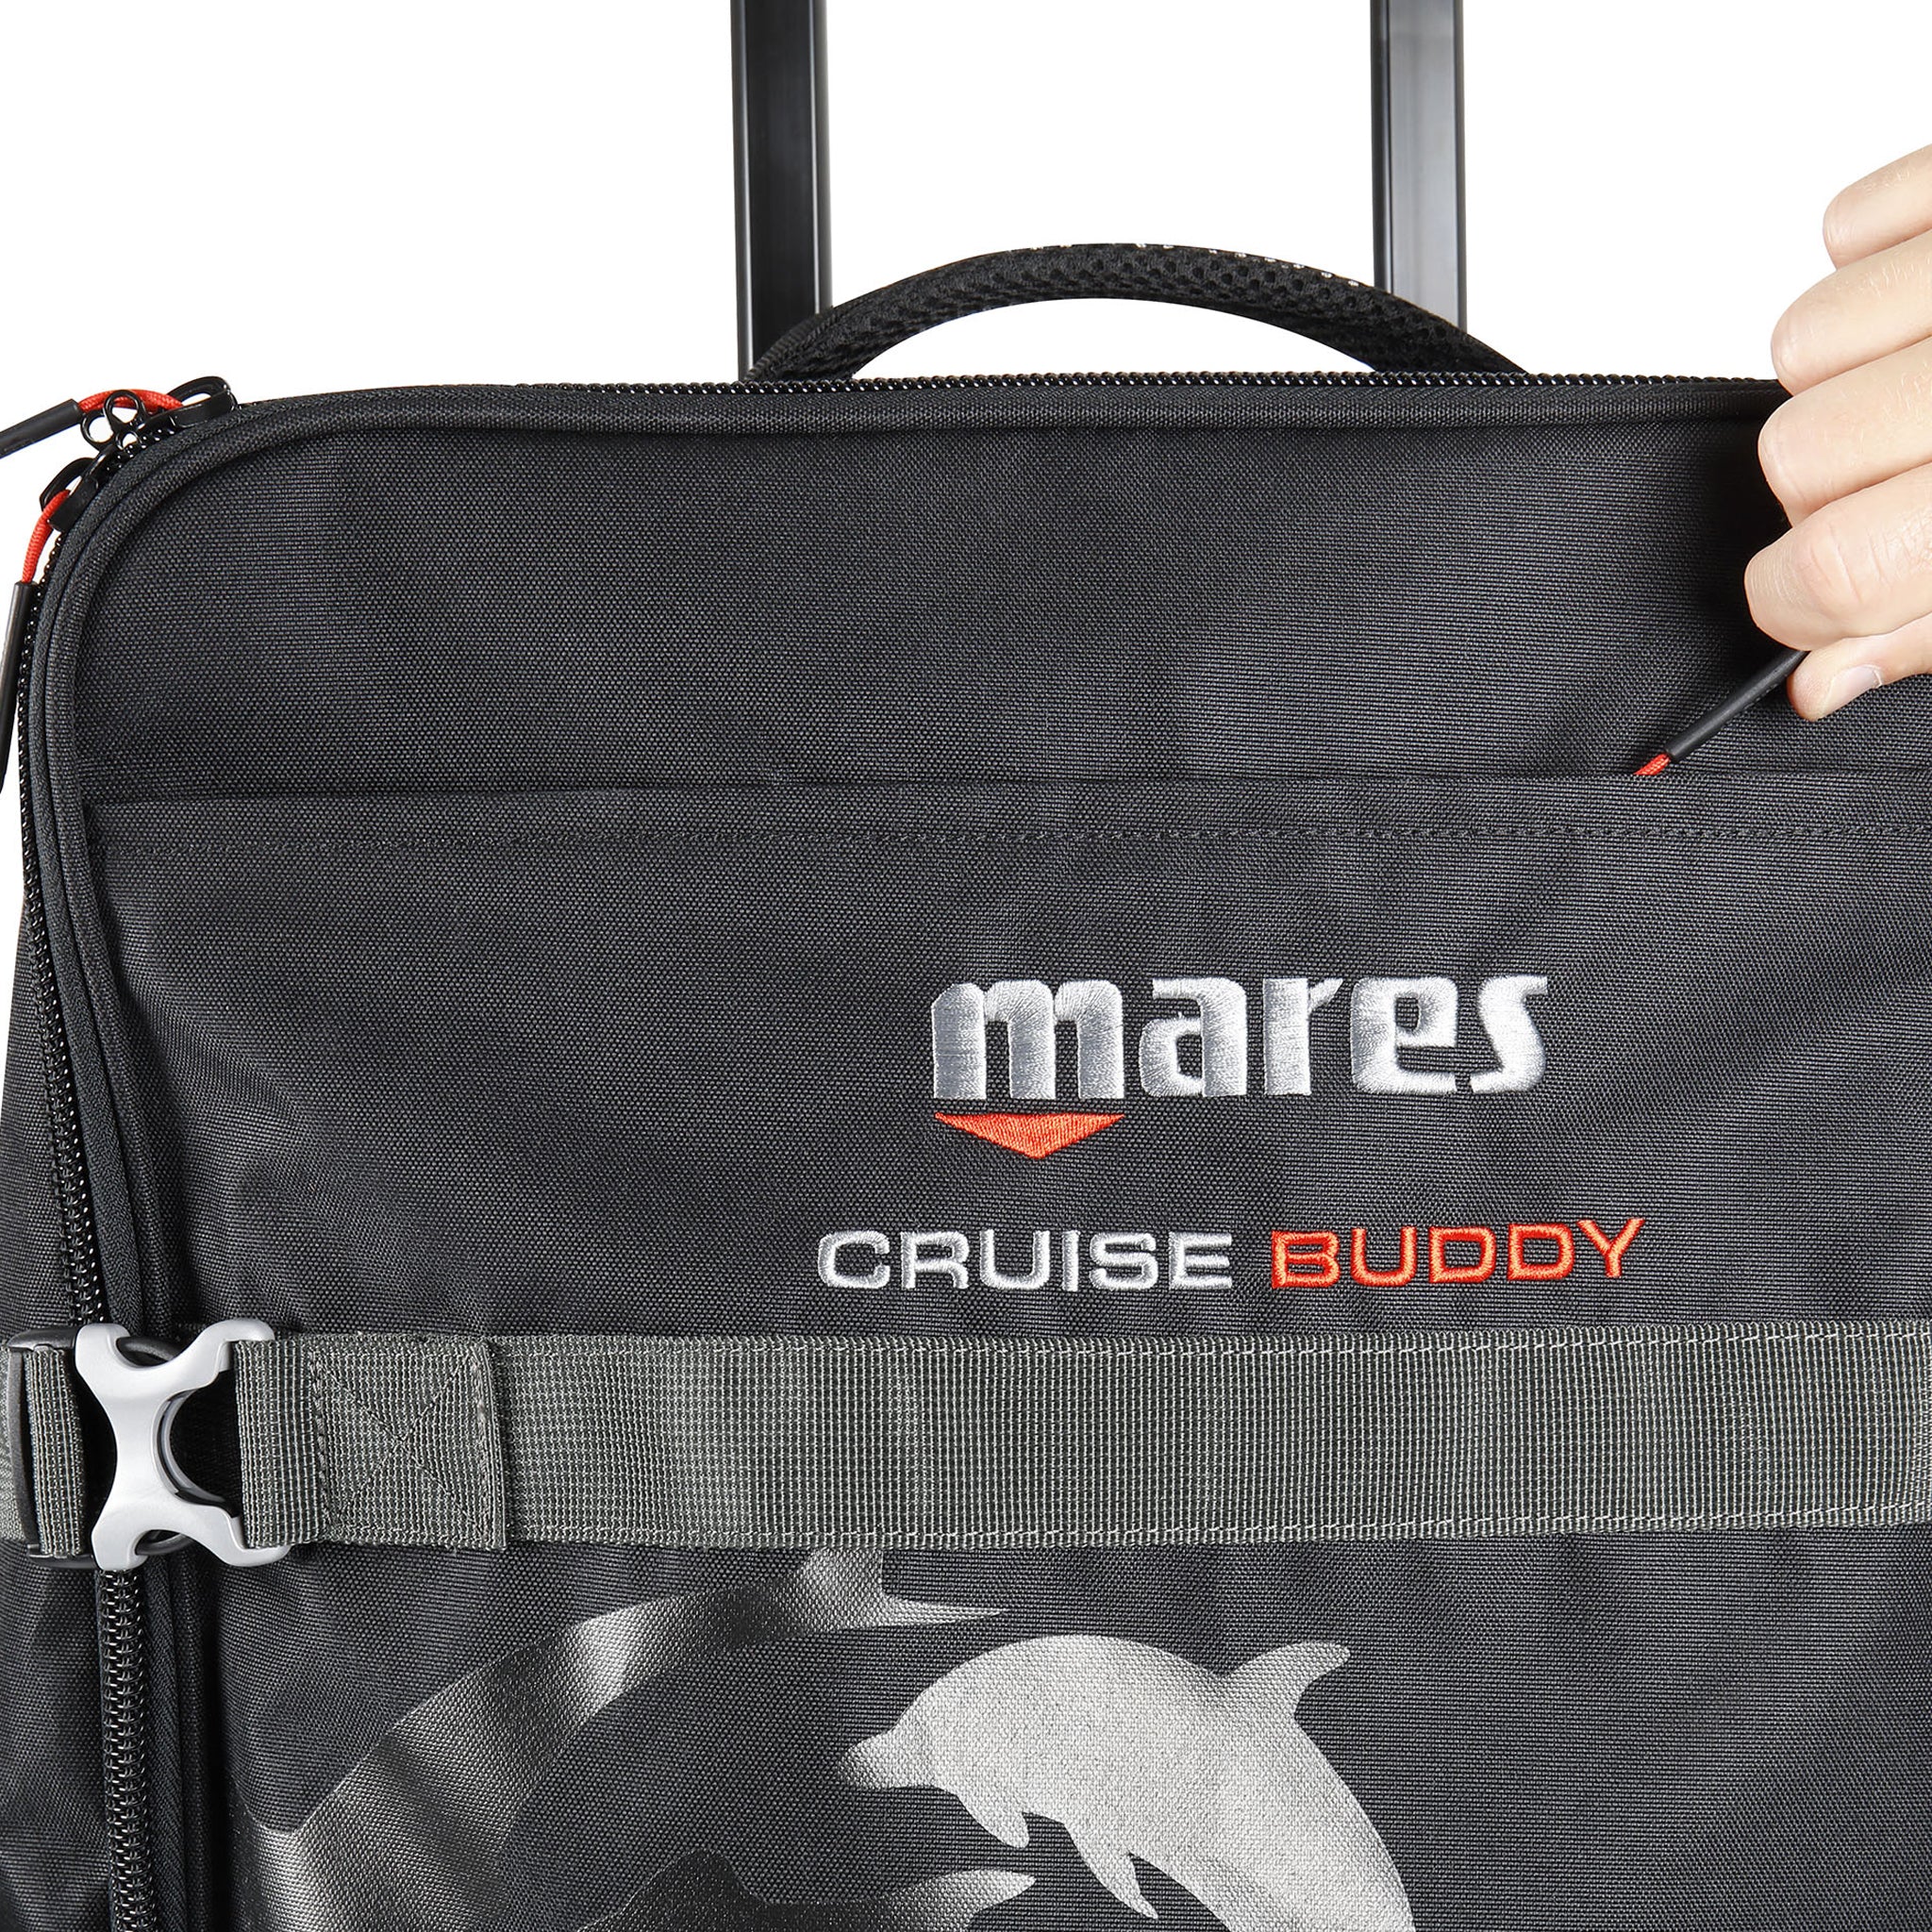 Mares Cruise Buddy Wheeled Bag 87L RECYCLEDMares Cruise Buddy Wheeled Bag 87L RECYCLED Detail